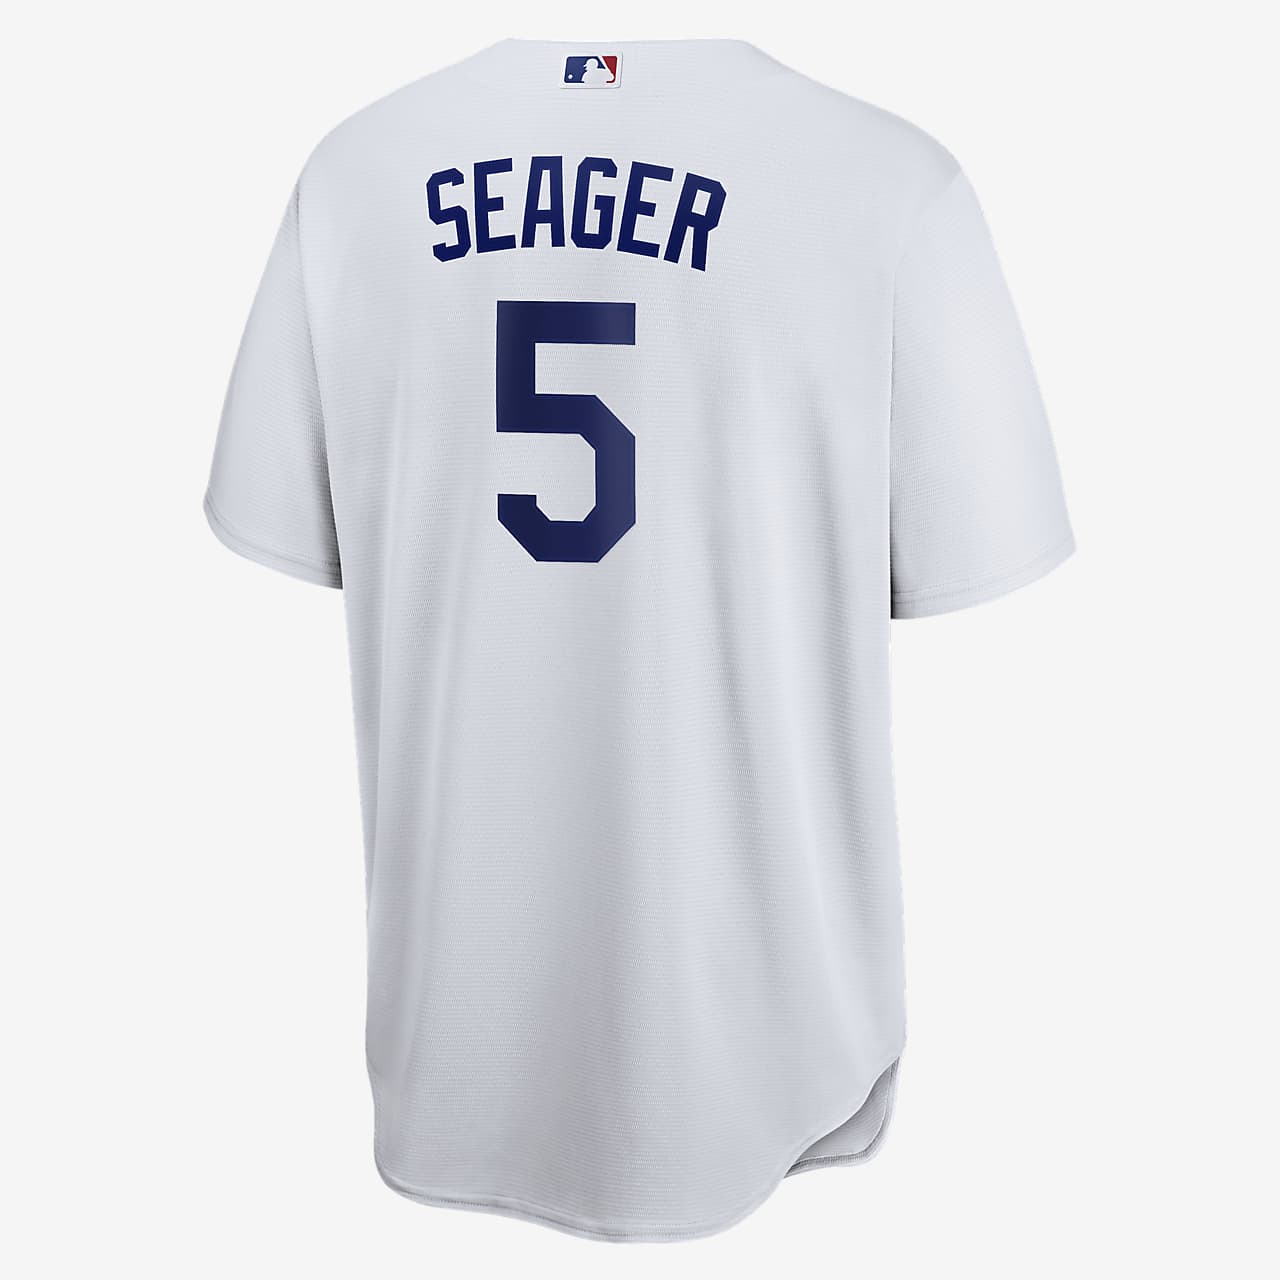 dodgers seager jersey